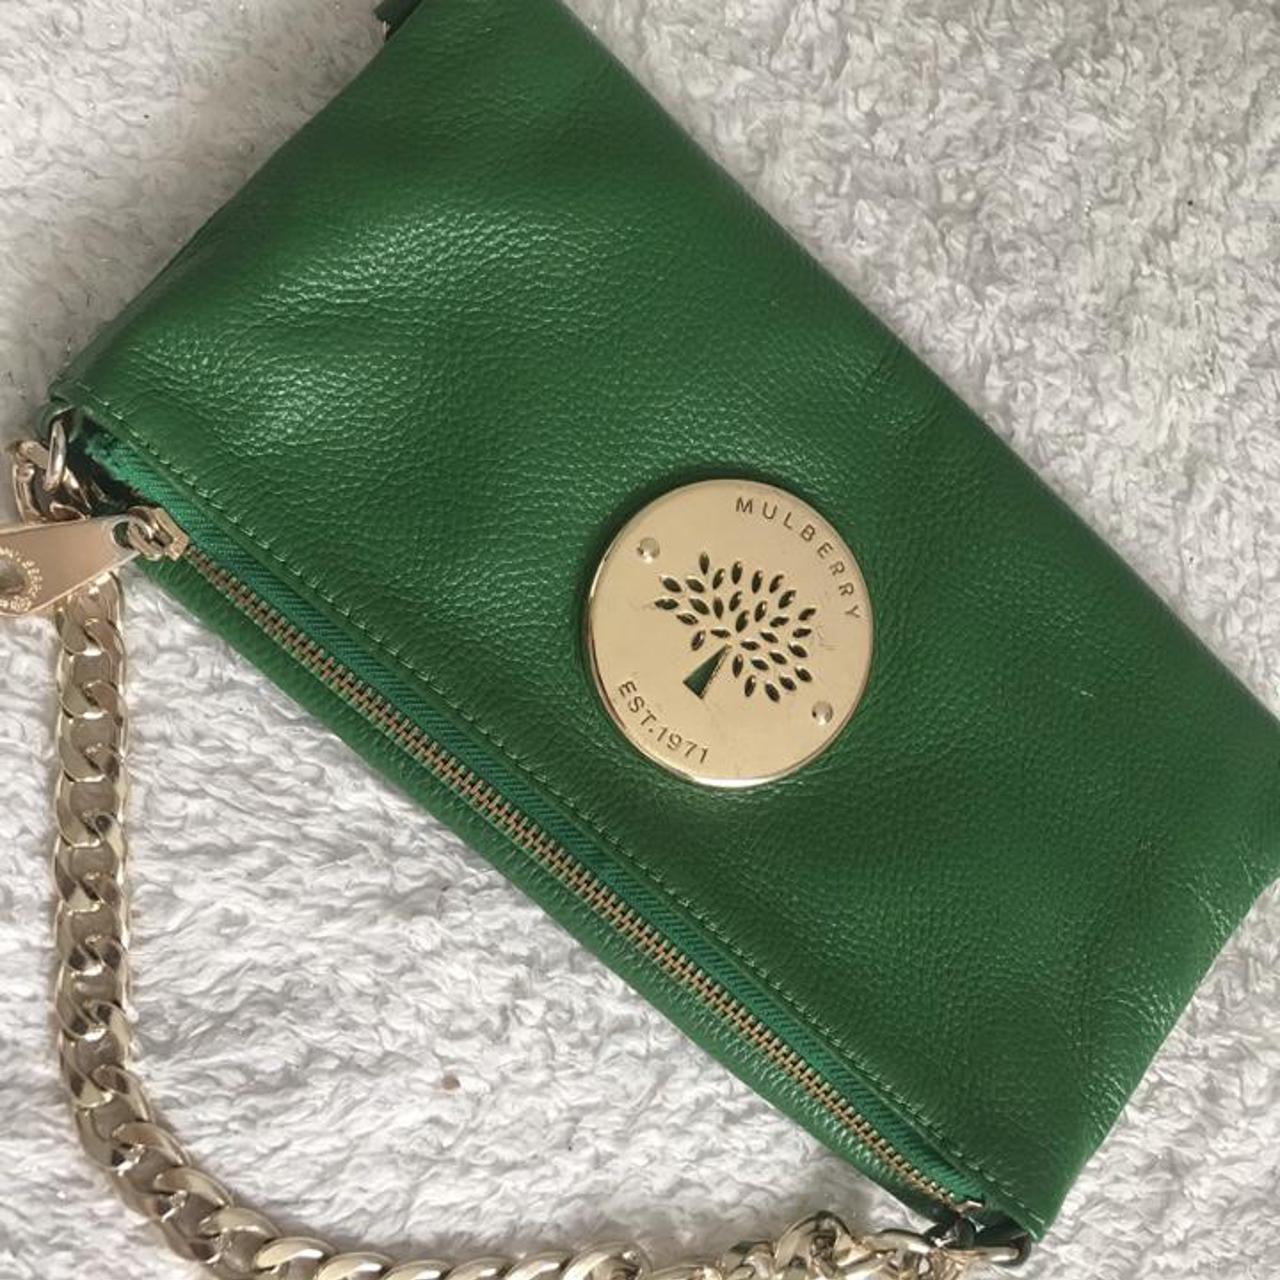 Mulberry purses | Stuff for Sale - Gumtree